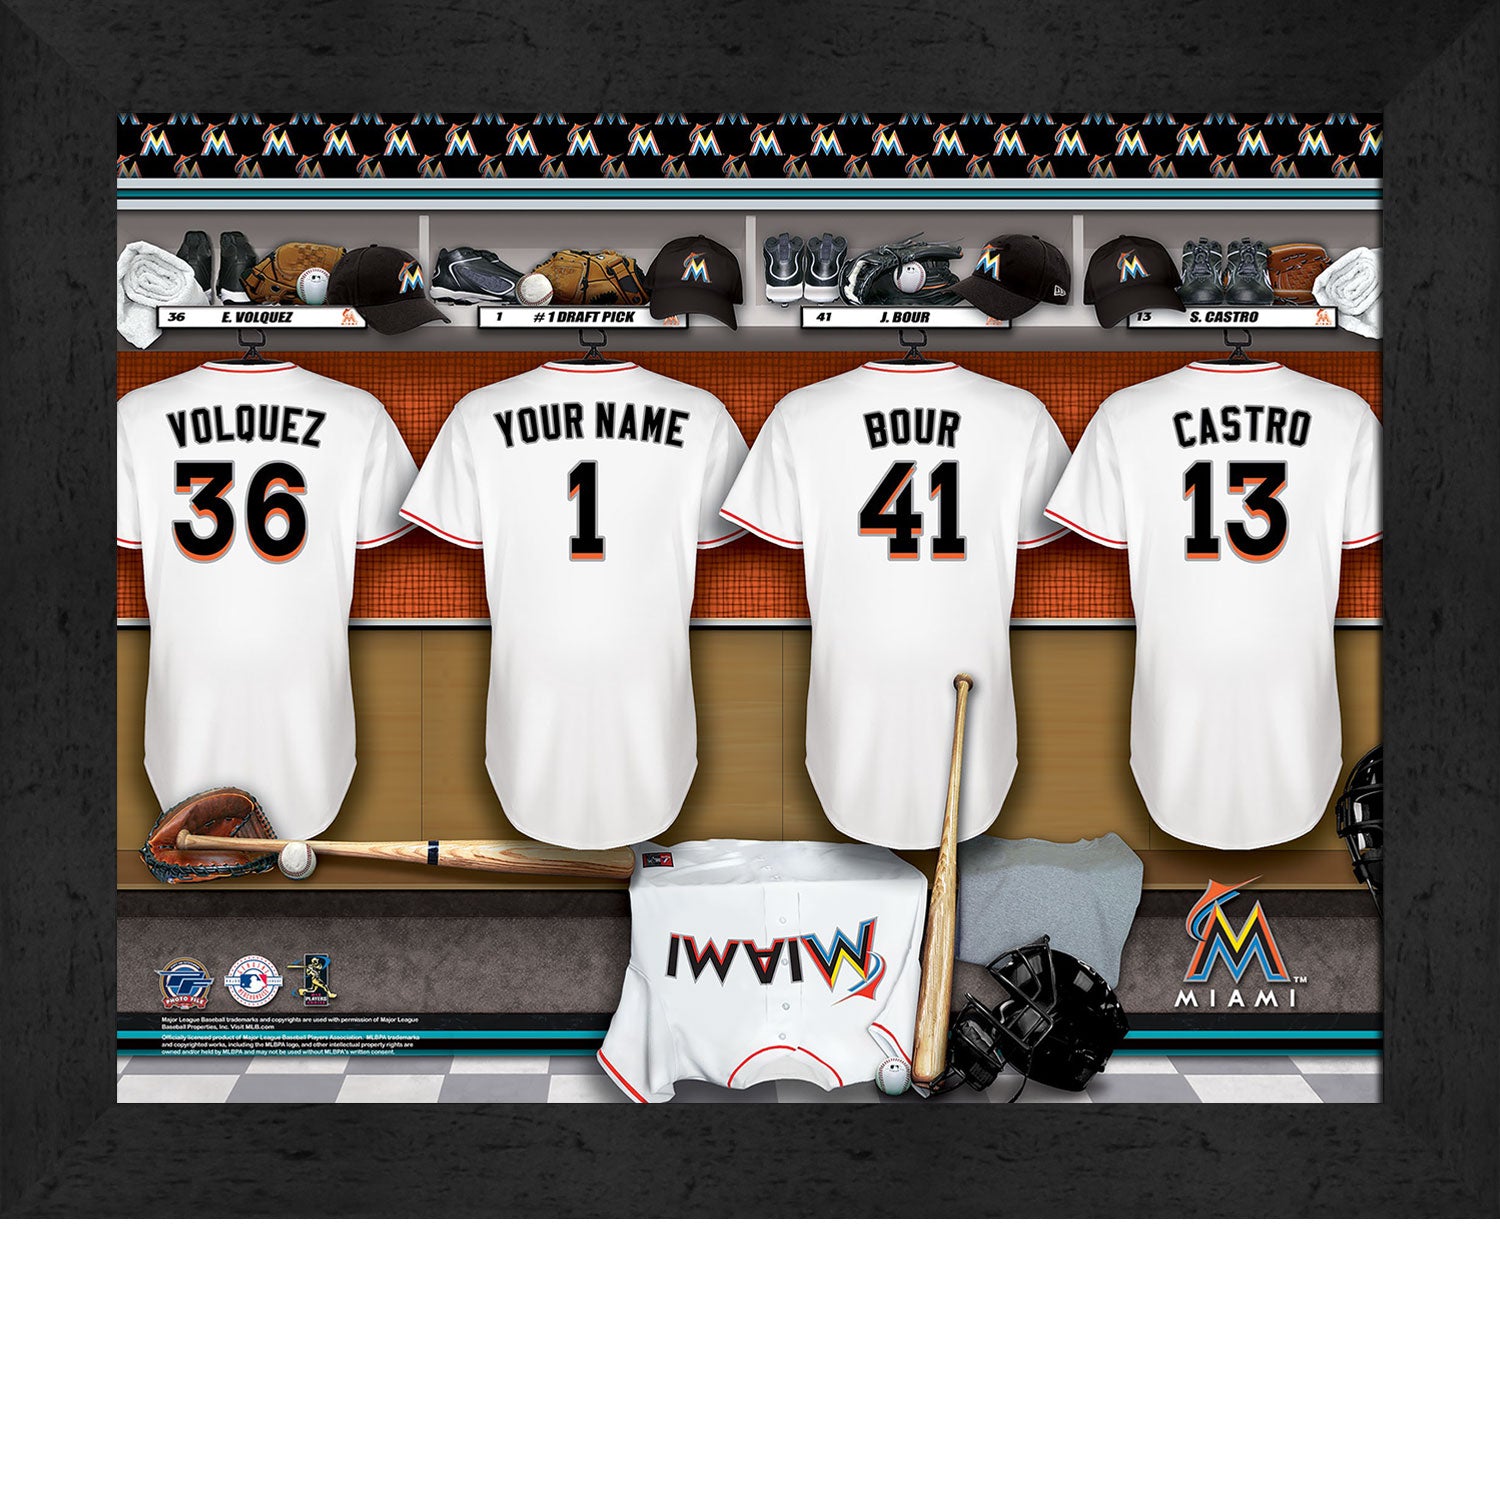 miami marlins personalized jersey